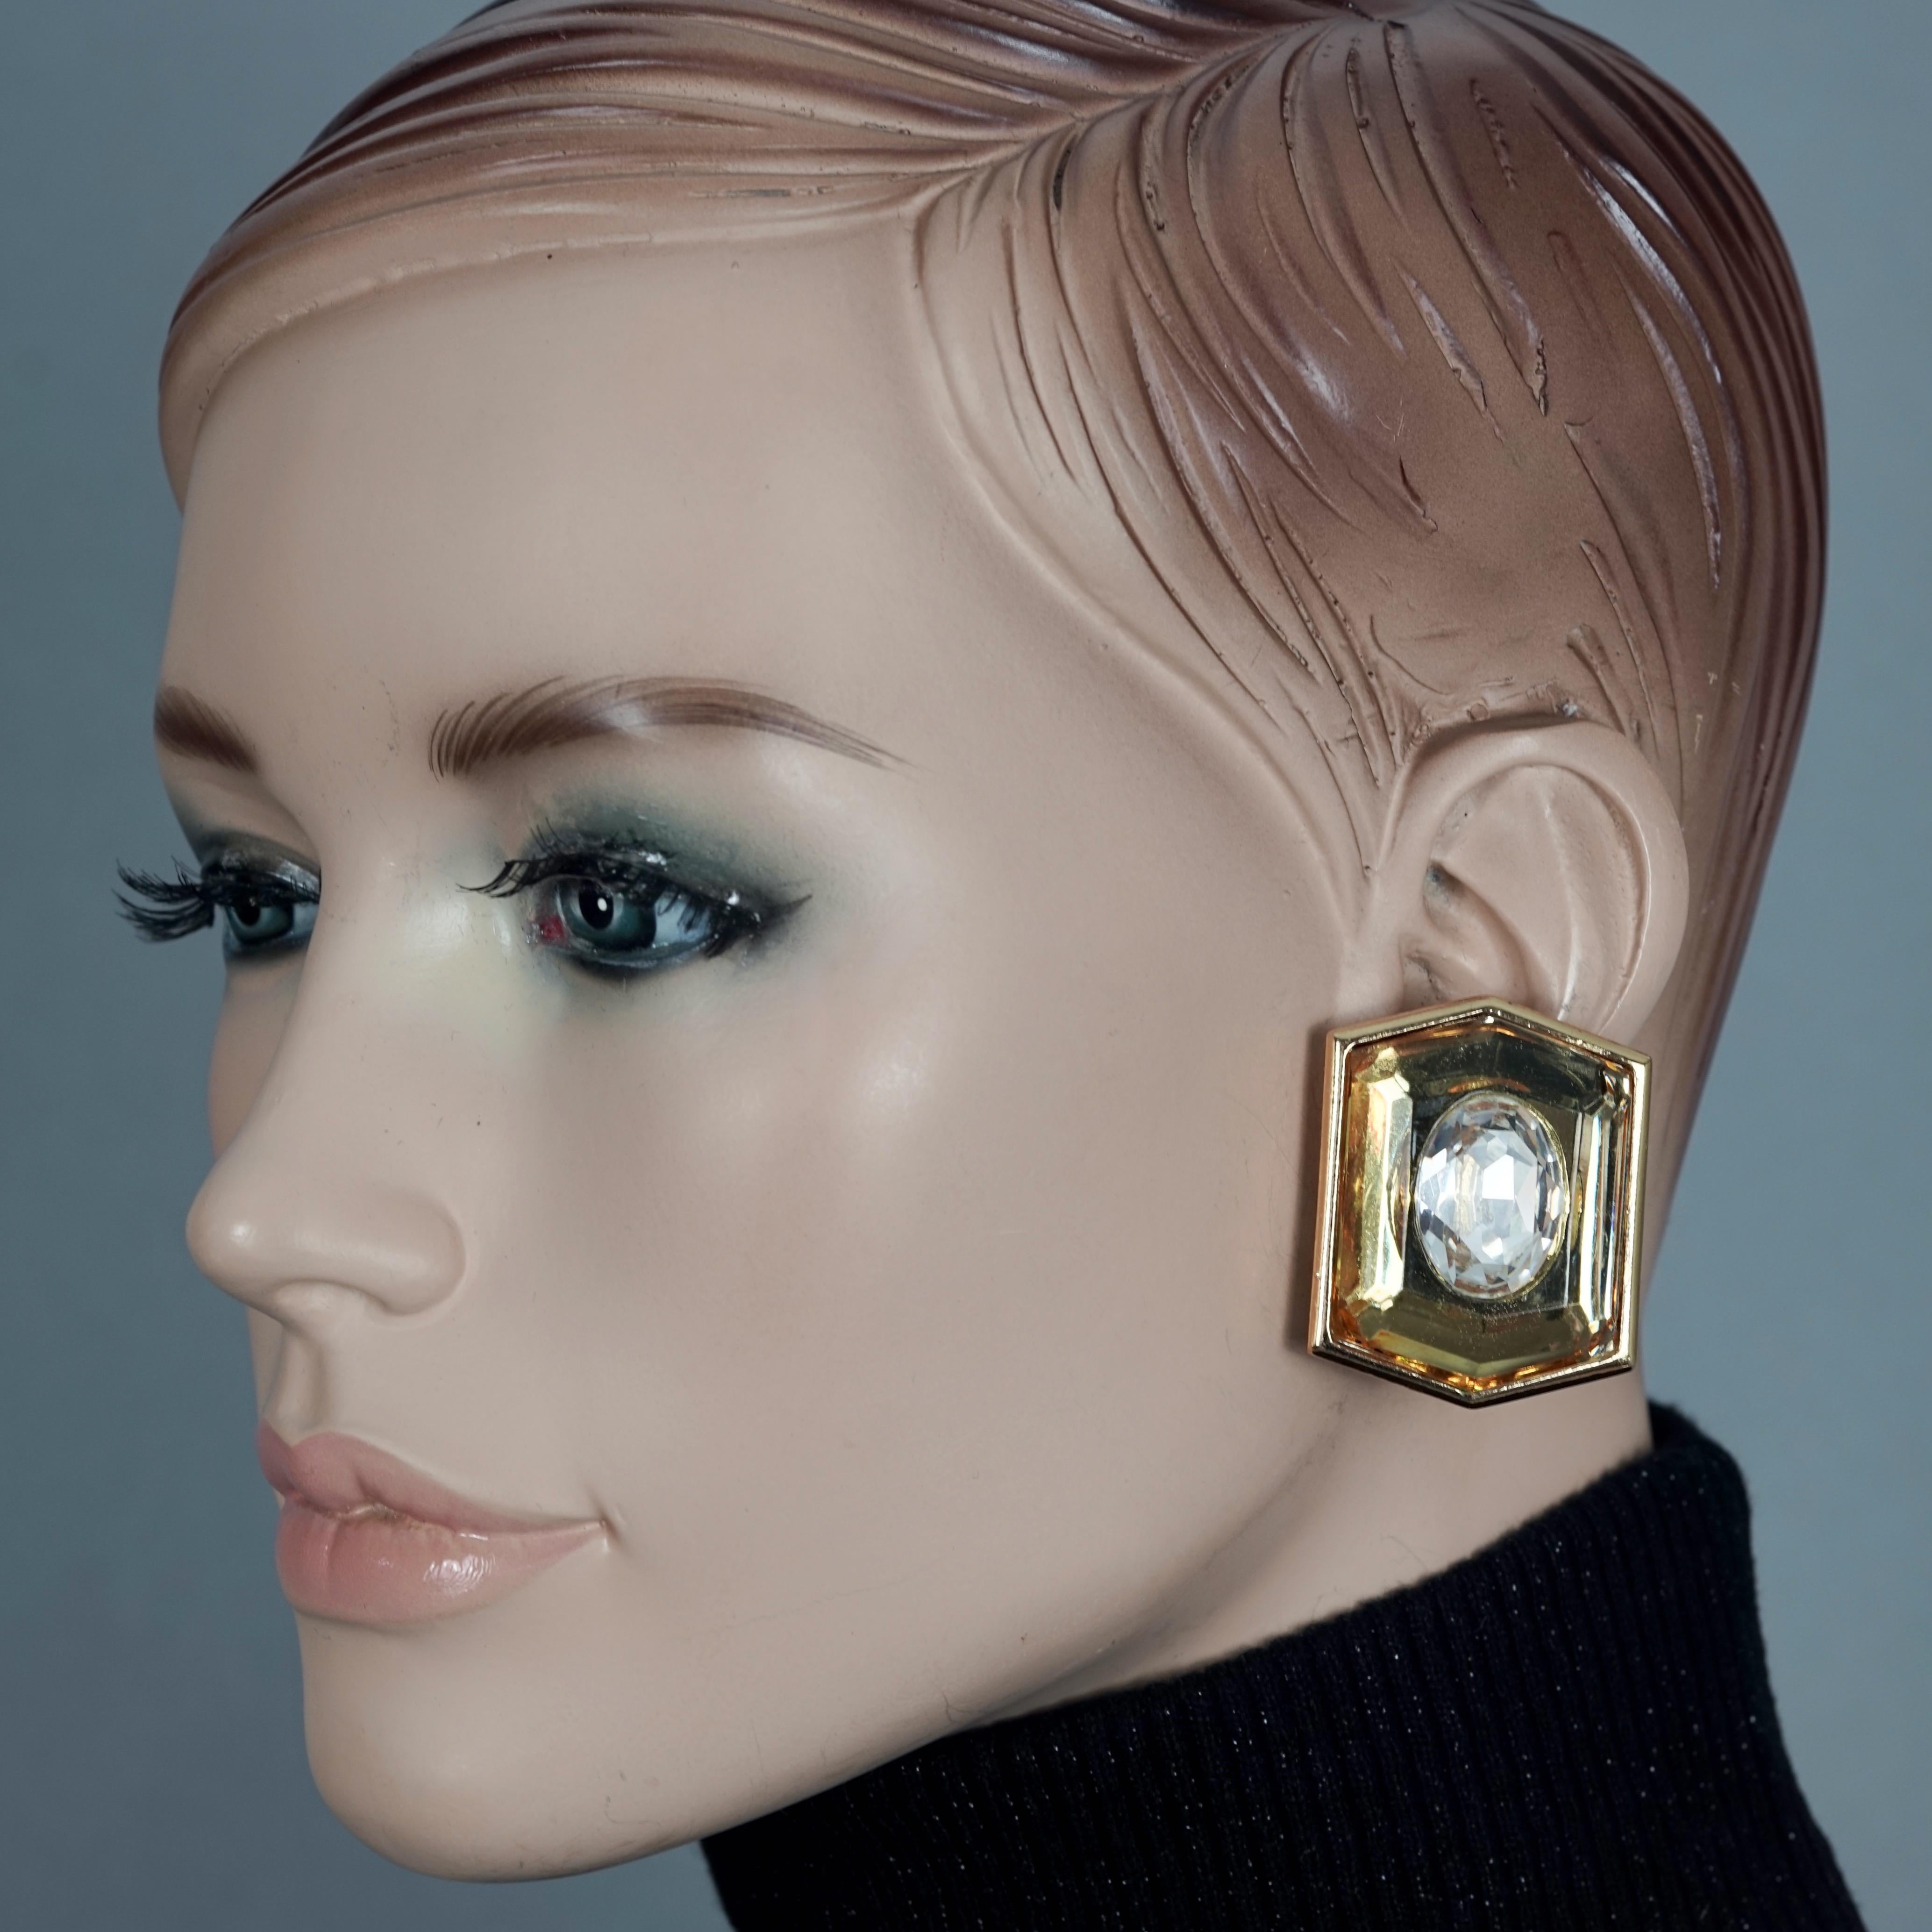 Vintage Massive YVES SAINT LAURENT Ysl Lucite Rhinestone Hexagon Earrings

Measurements:
Height: 1.65 inches (4.2 cm)
Width: 1.34 inches (3.4 cm)
Weight per Earring: 21 grams

Features:
- 100% Authentic YVES SAINT LAURENT.
- Massive hexagon lucite